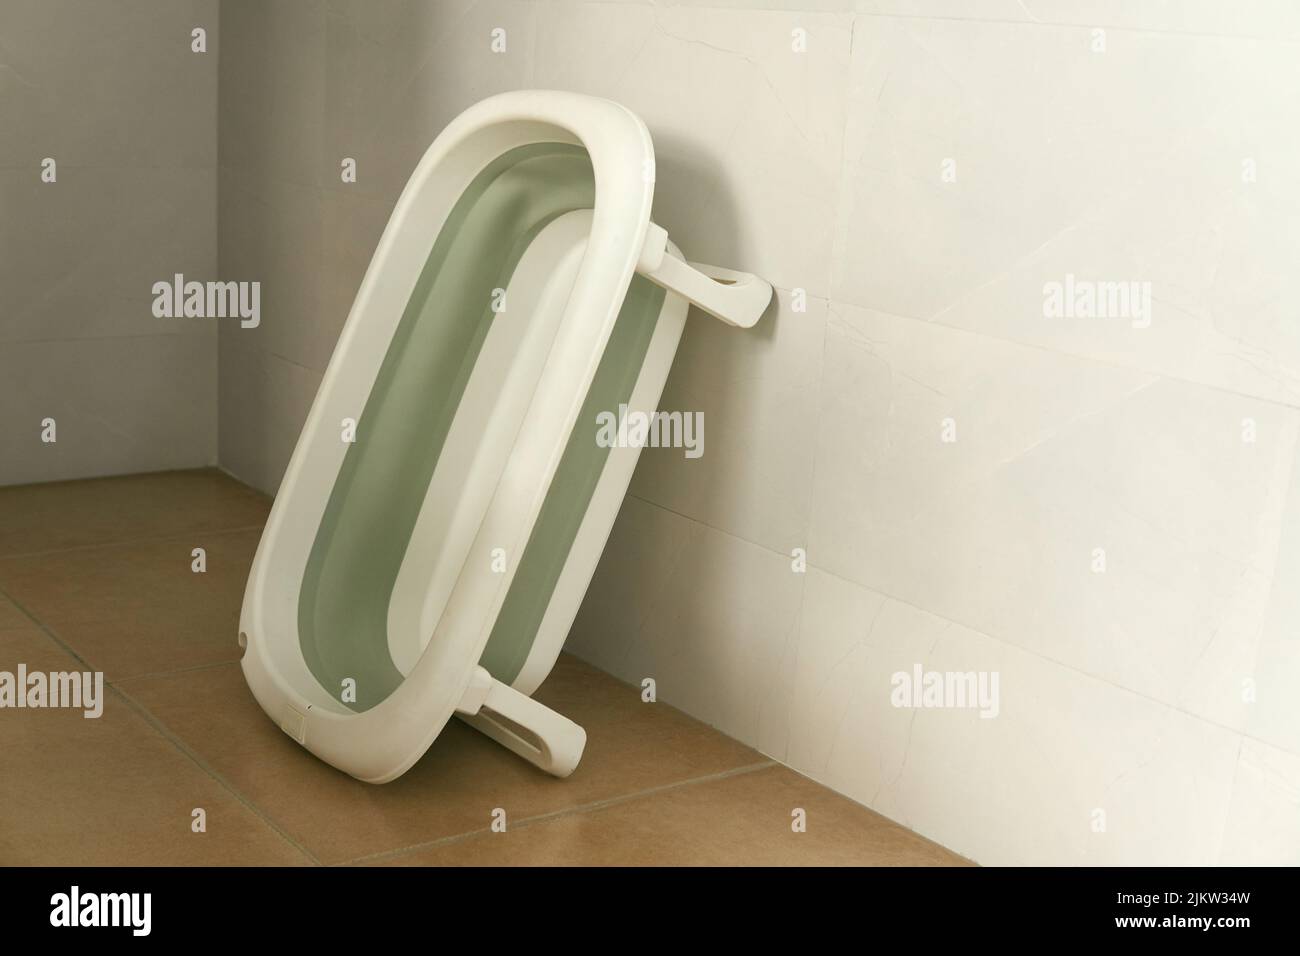 A bath tub for small children leaned on the wall Stock Photo